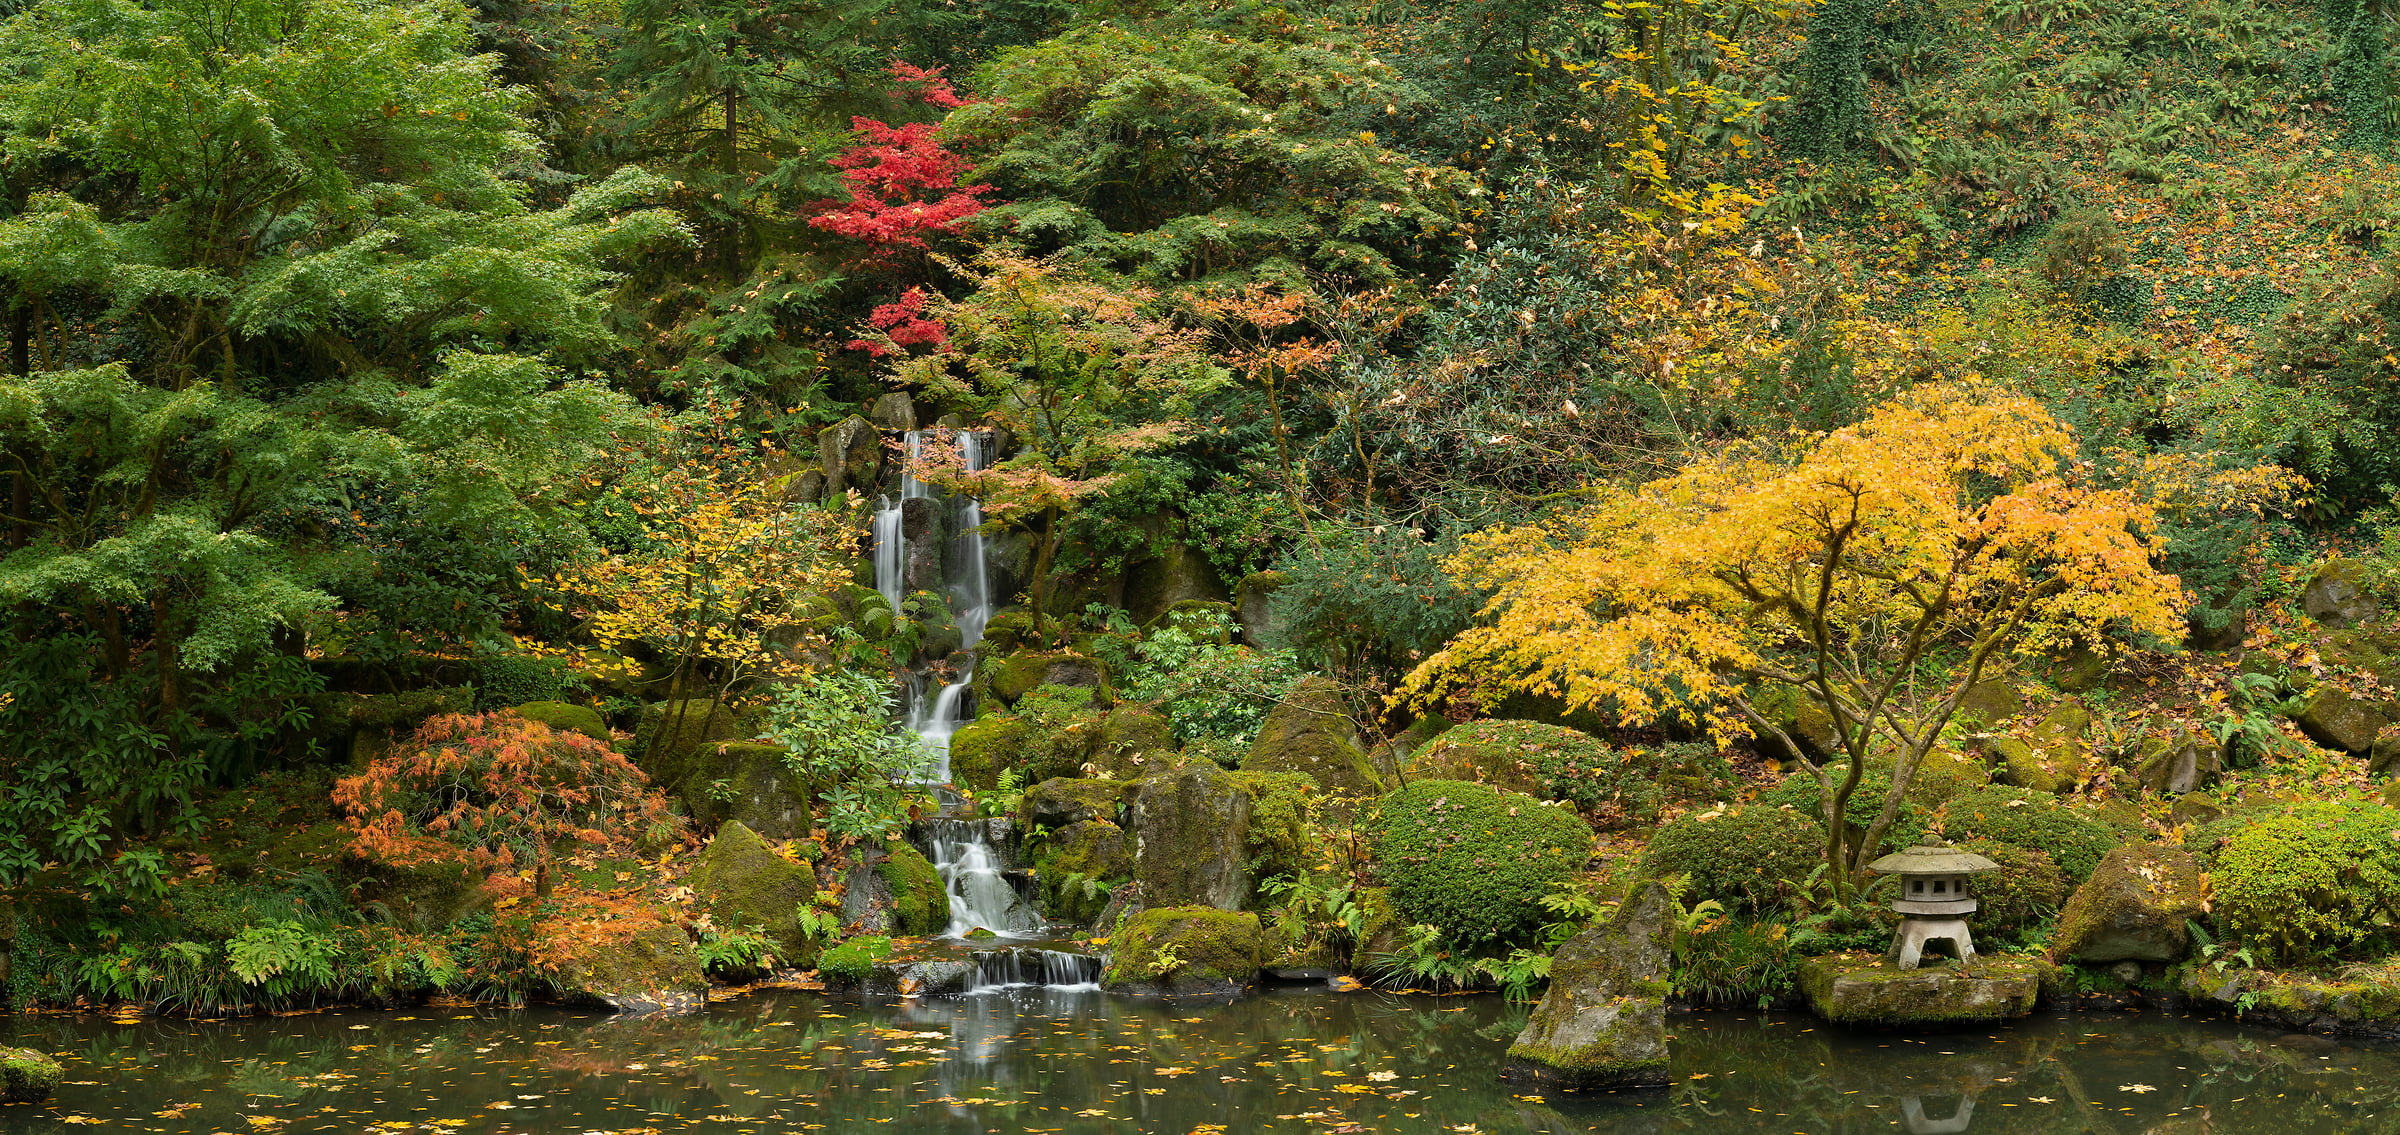 361 megapixels! A very high resolution, large-format VAST photo print of a beautiful waterfall artwork; photograph created by Greg Probst in Portland Japanese Garden, Portland, Oregon.